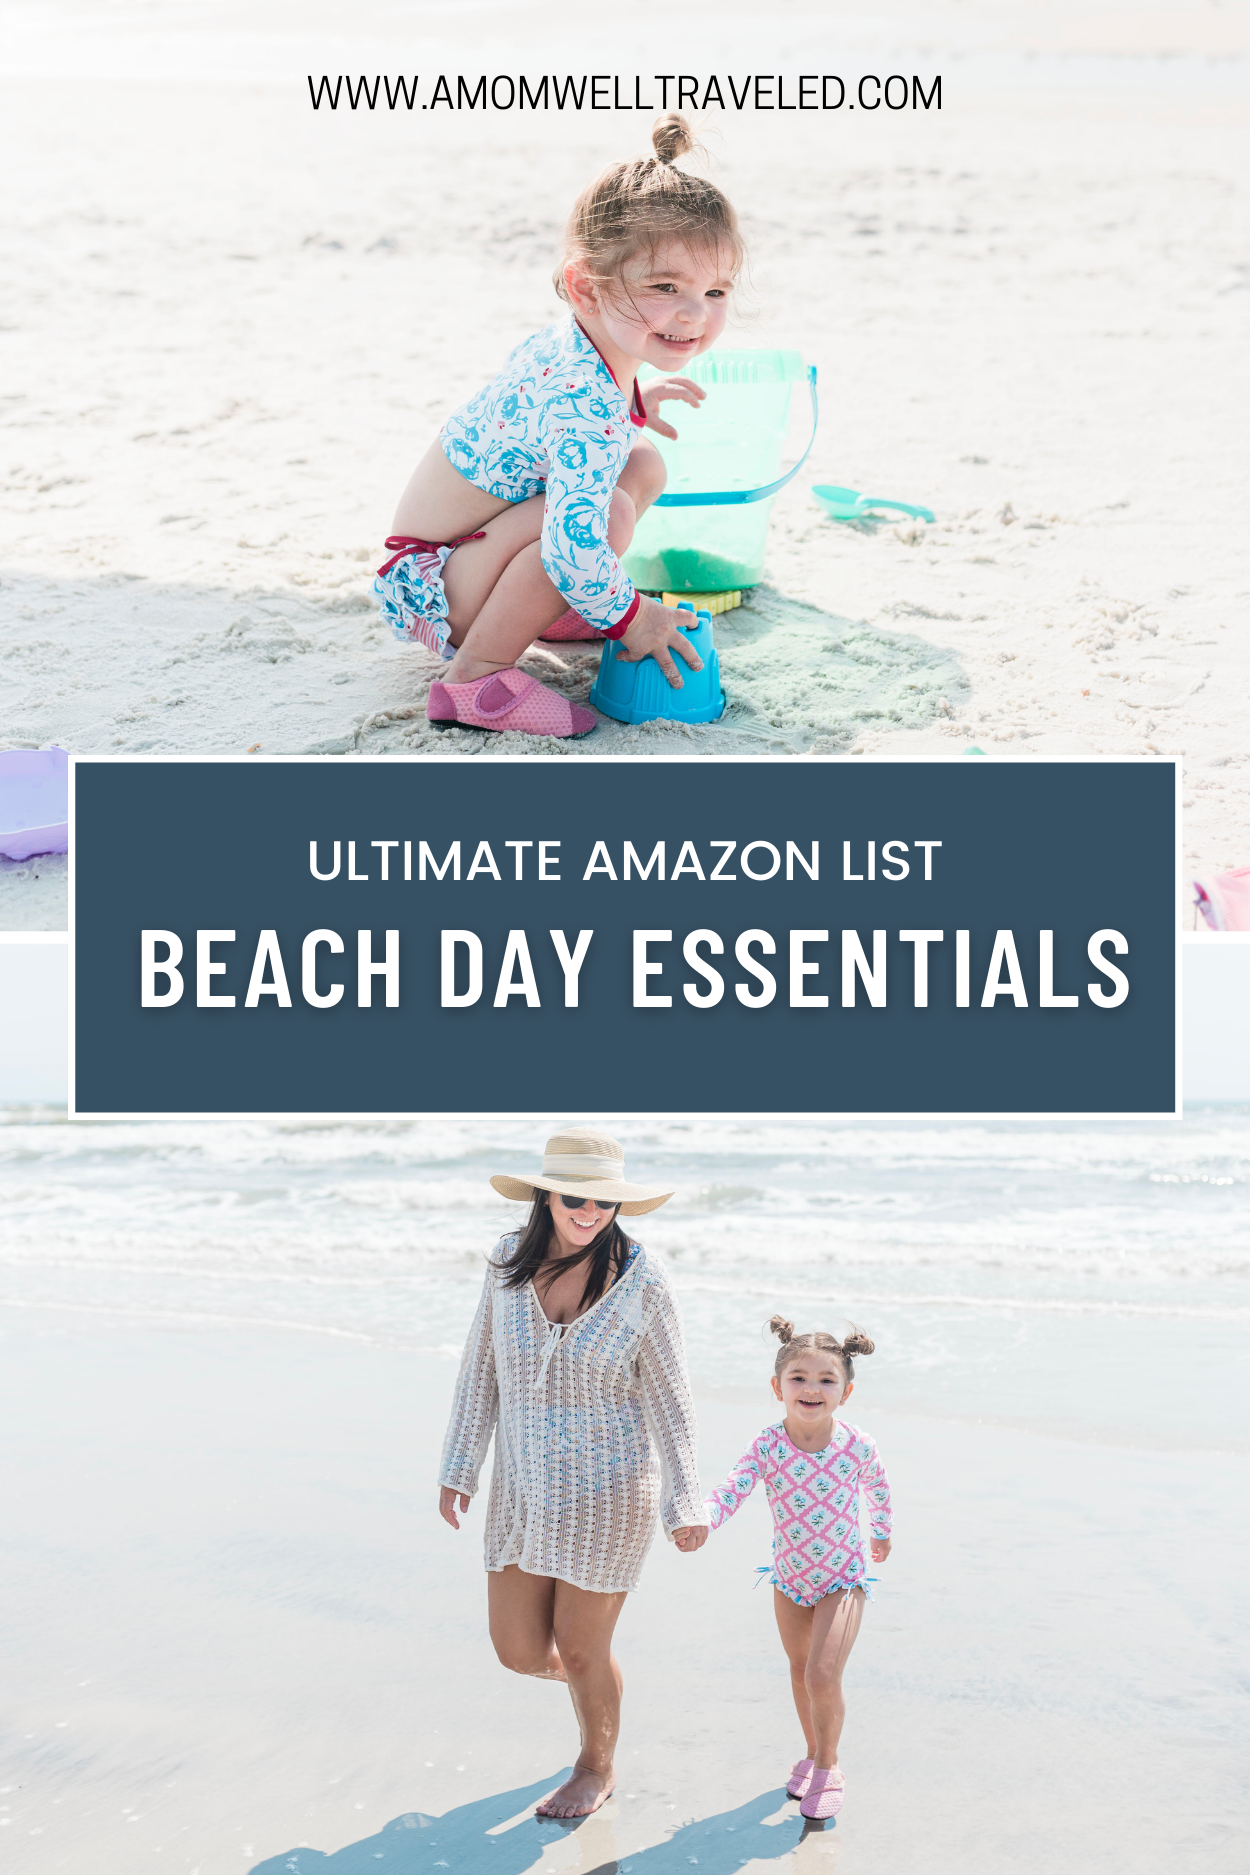 Amazon Beach Day Essentials for Families by A Mom Well Traveled Blog